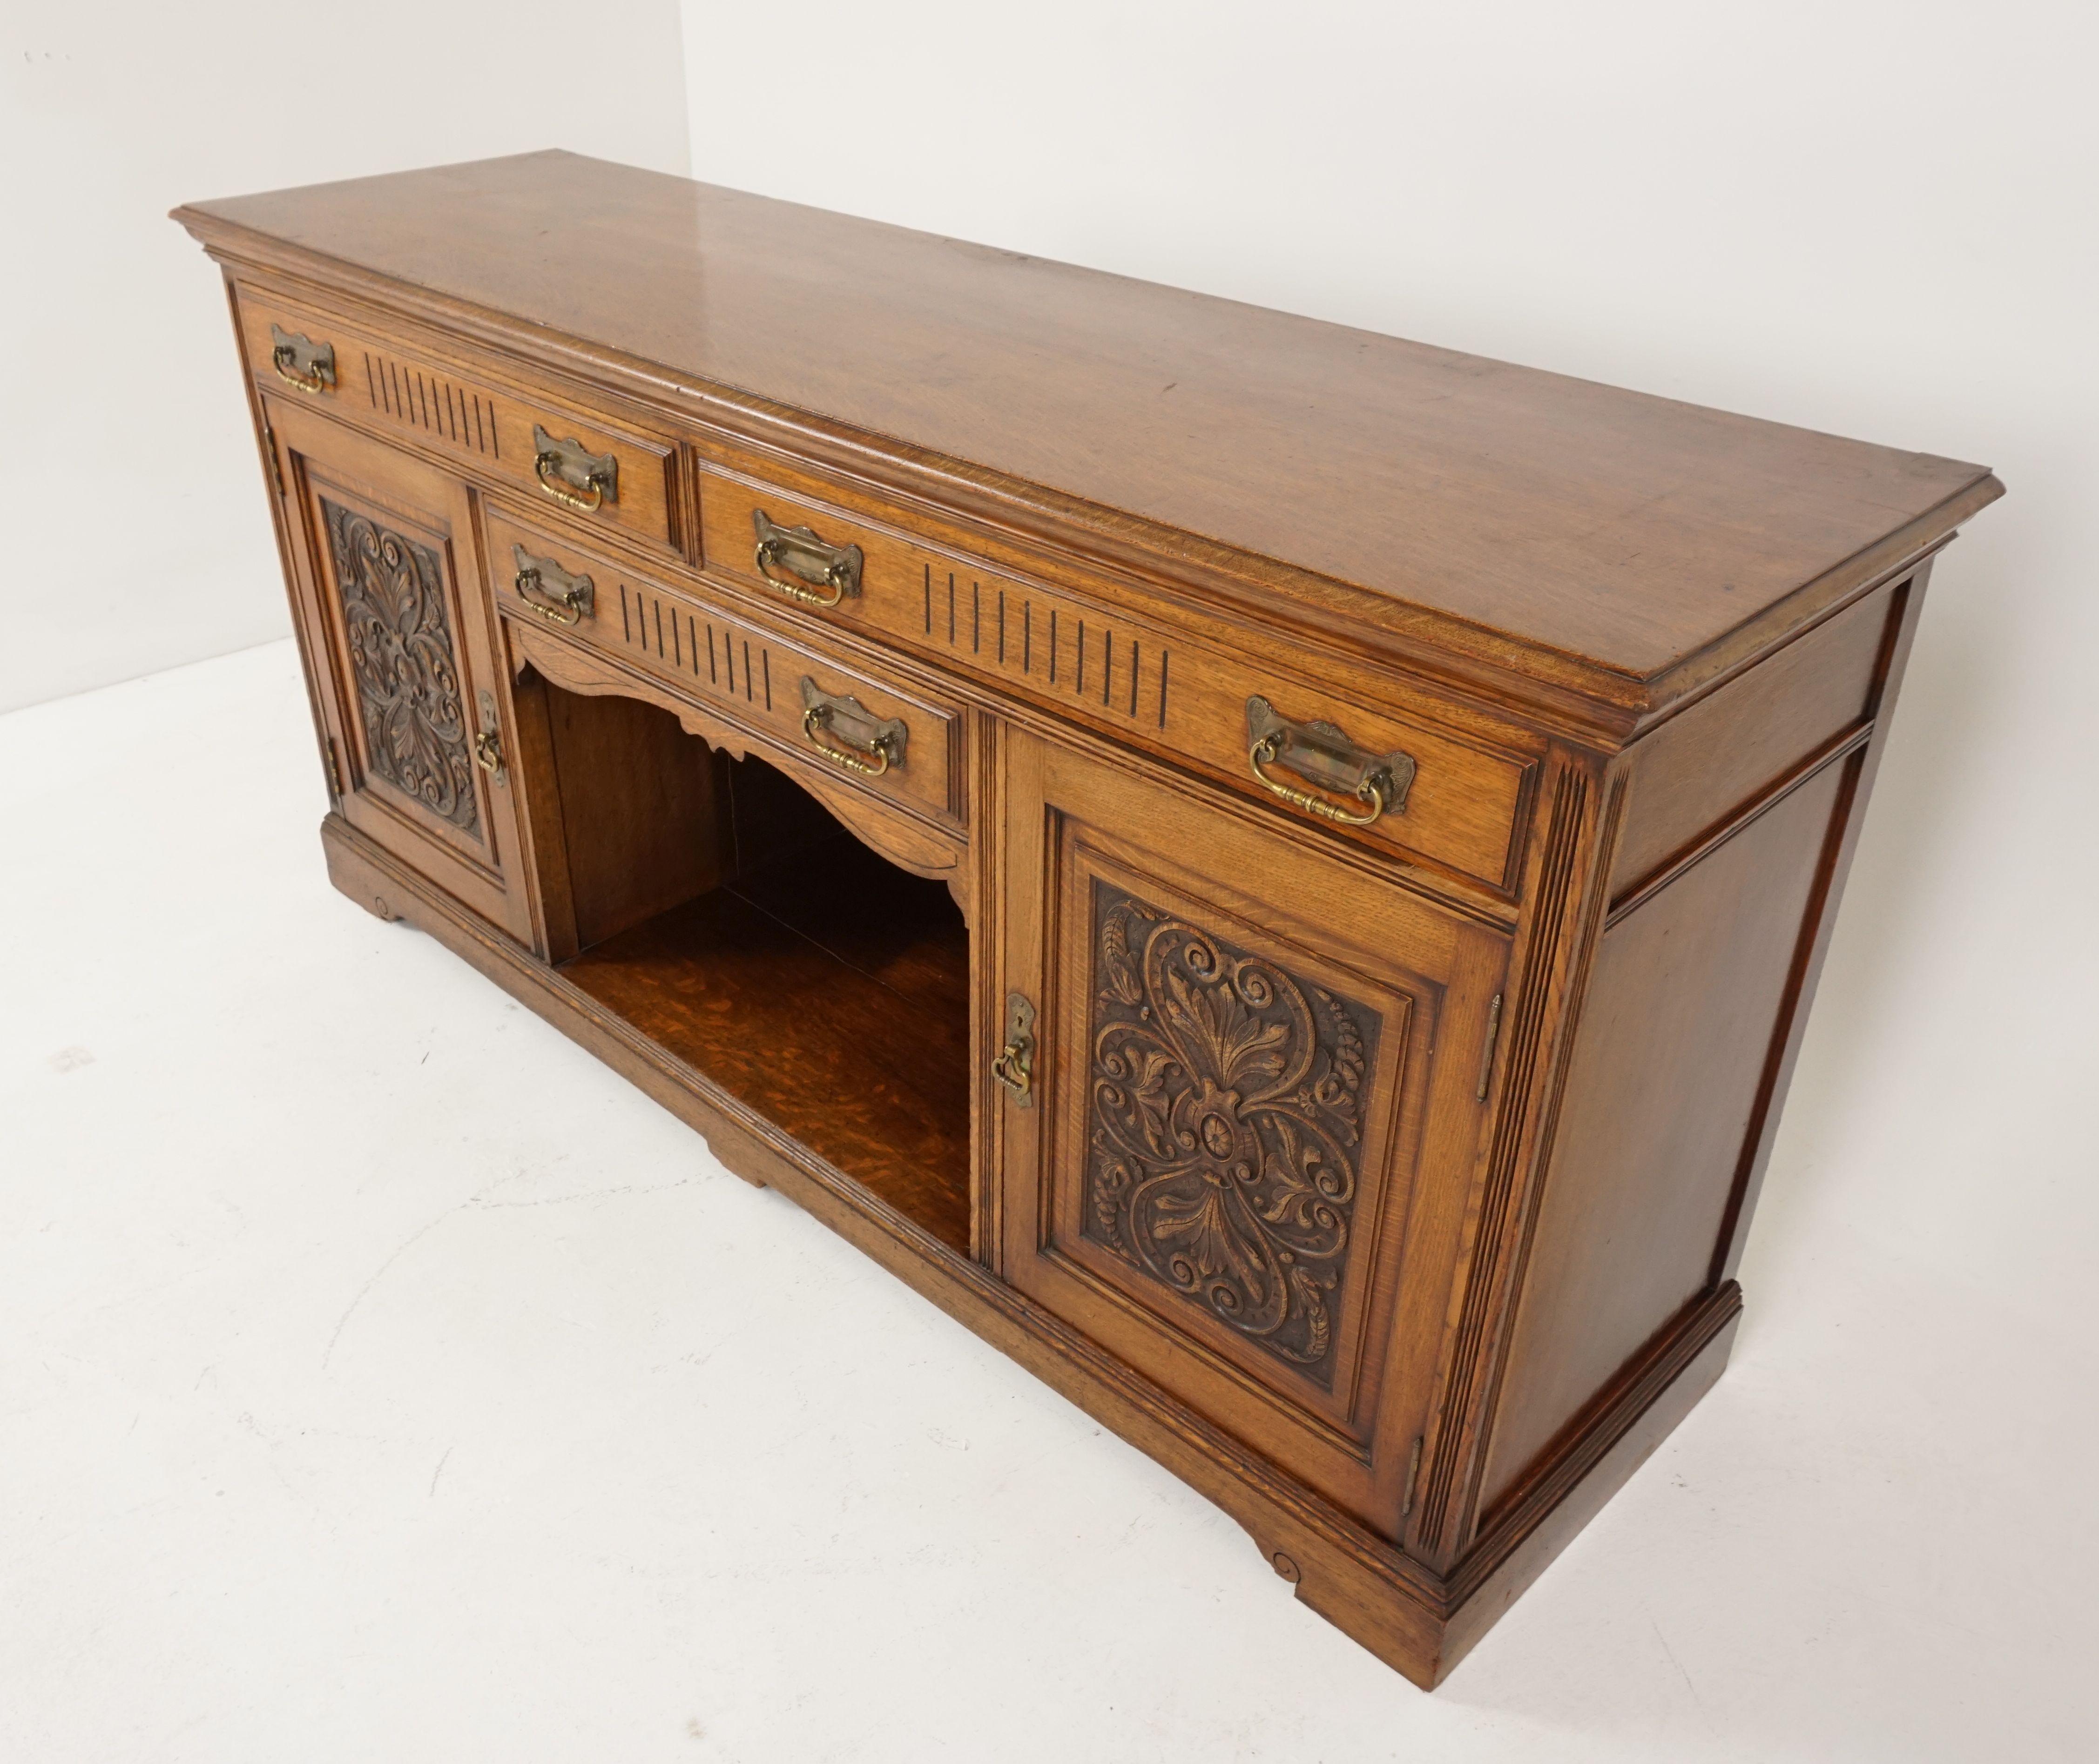 Antique carved oak sideboard, buffet, Scotland 1900, H135

Scotland 1900
Solid oak
Original finish
Rectangular moulded top
Pair of long dovetailed drawers on top
Smaller central drawer underneath
All with original brass hardware
The center has an